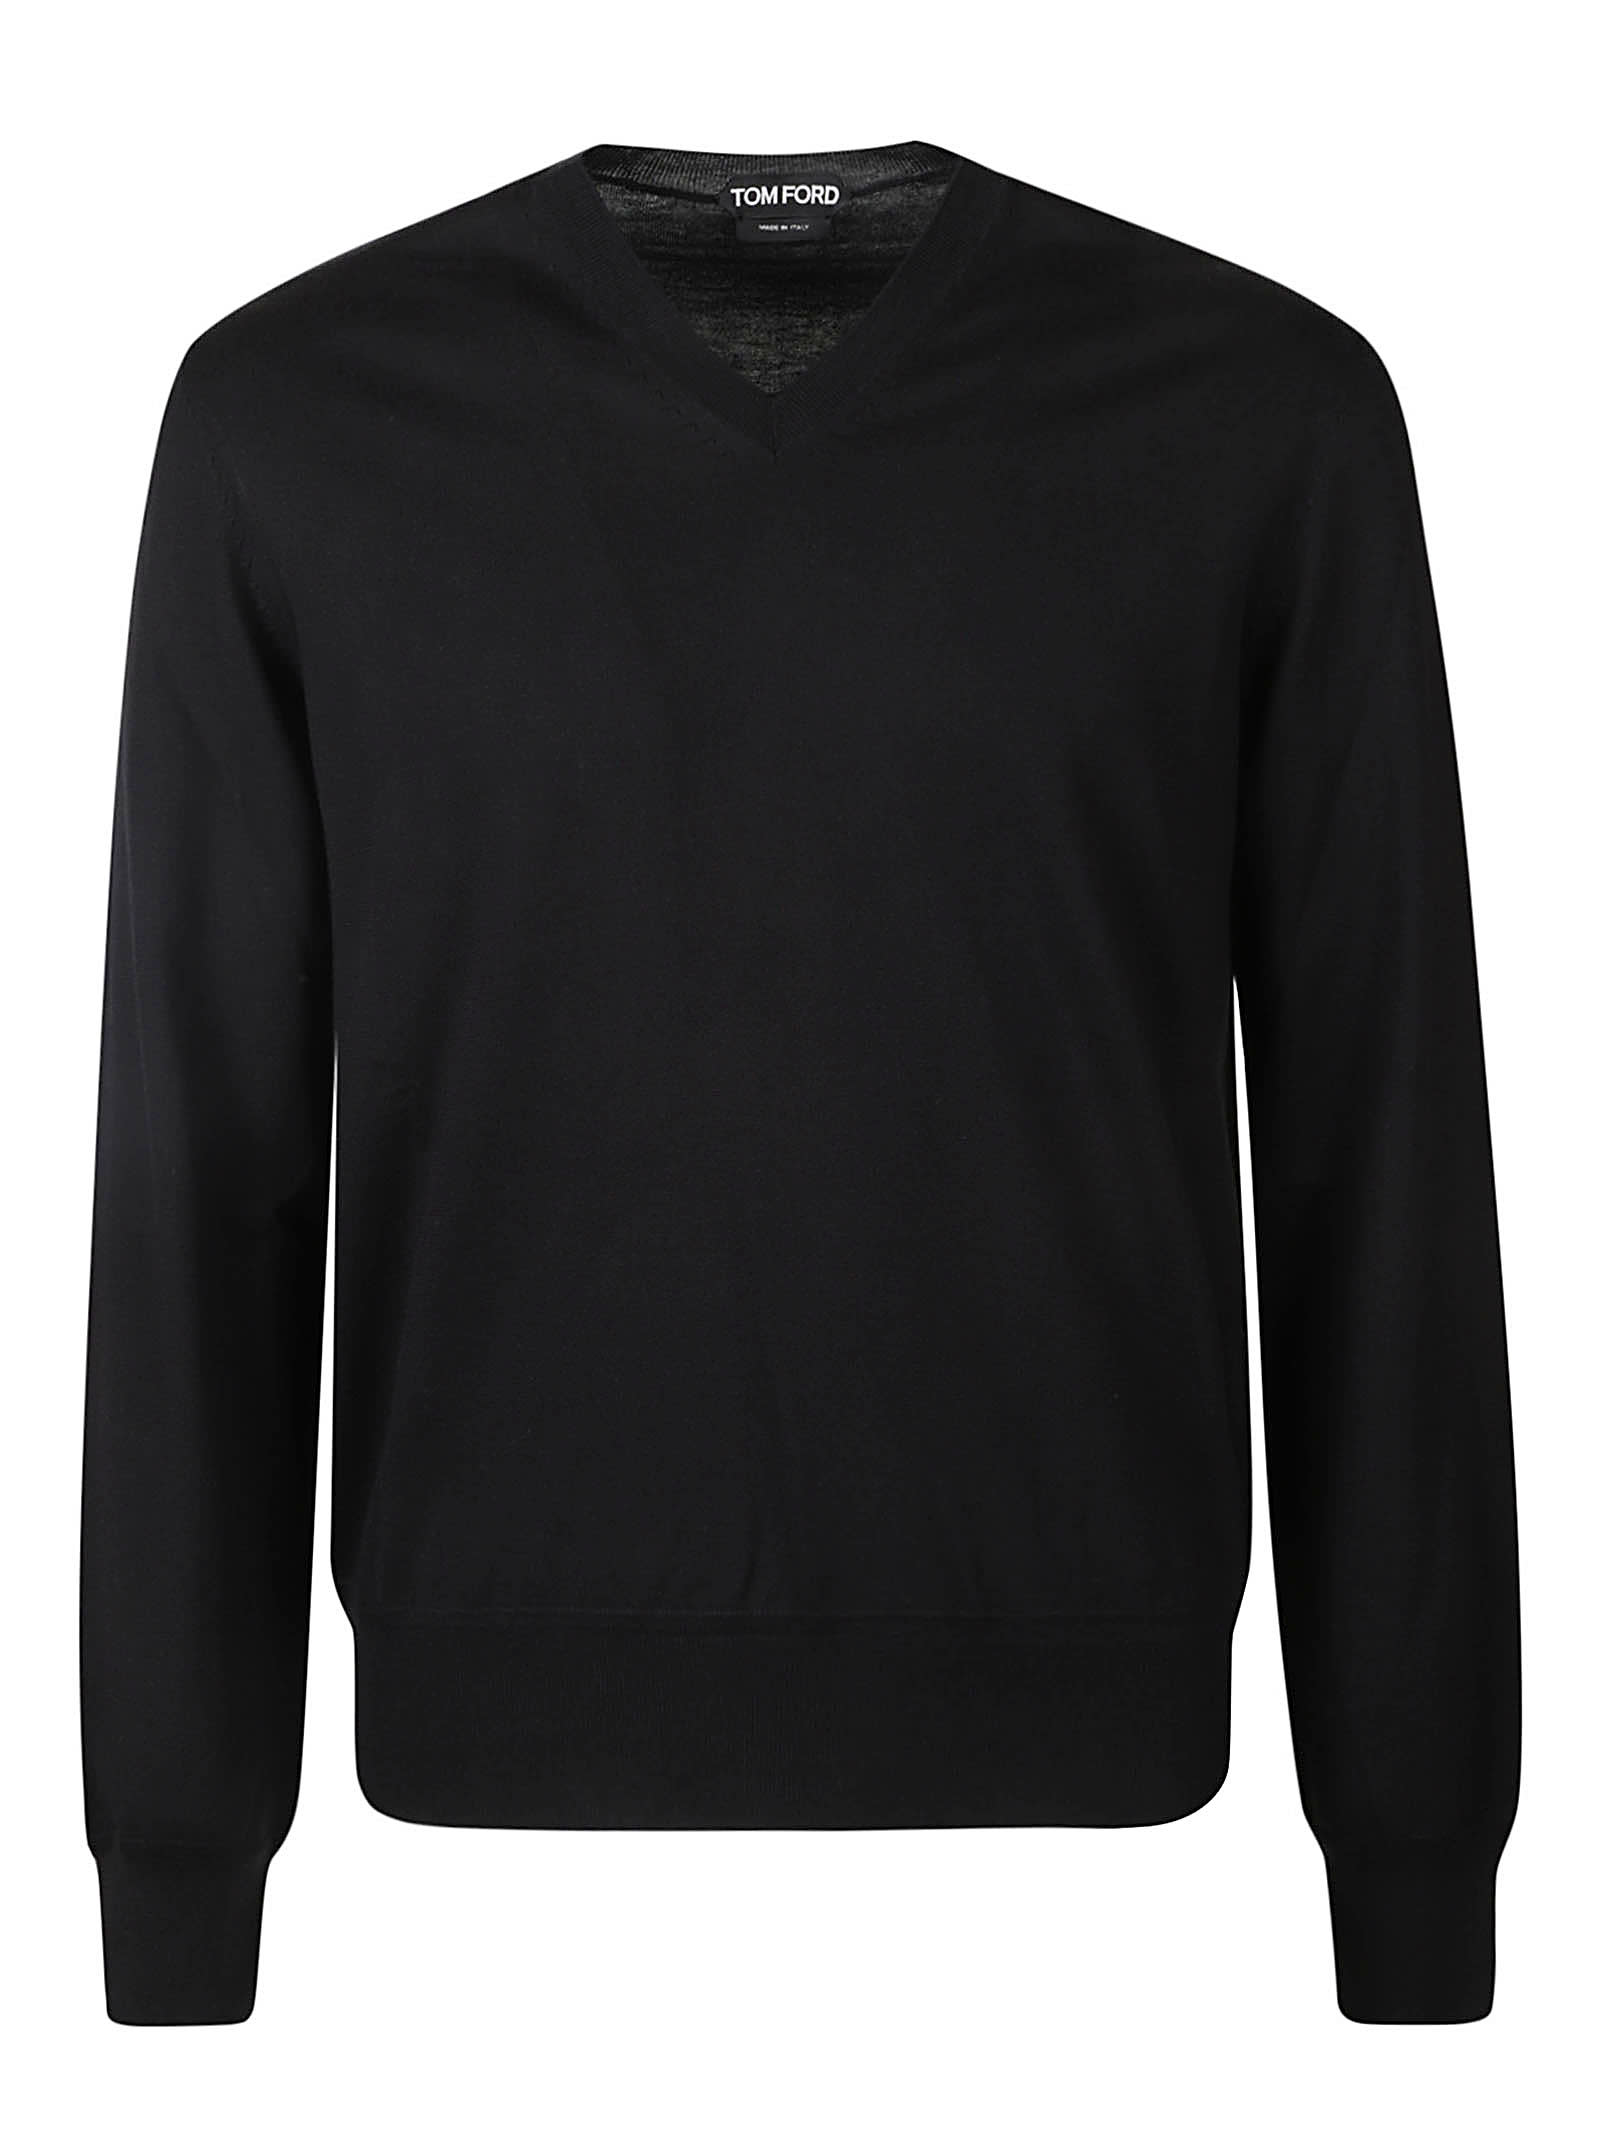 TOM FORD ROUND NECK SWEATER